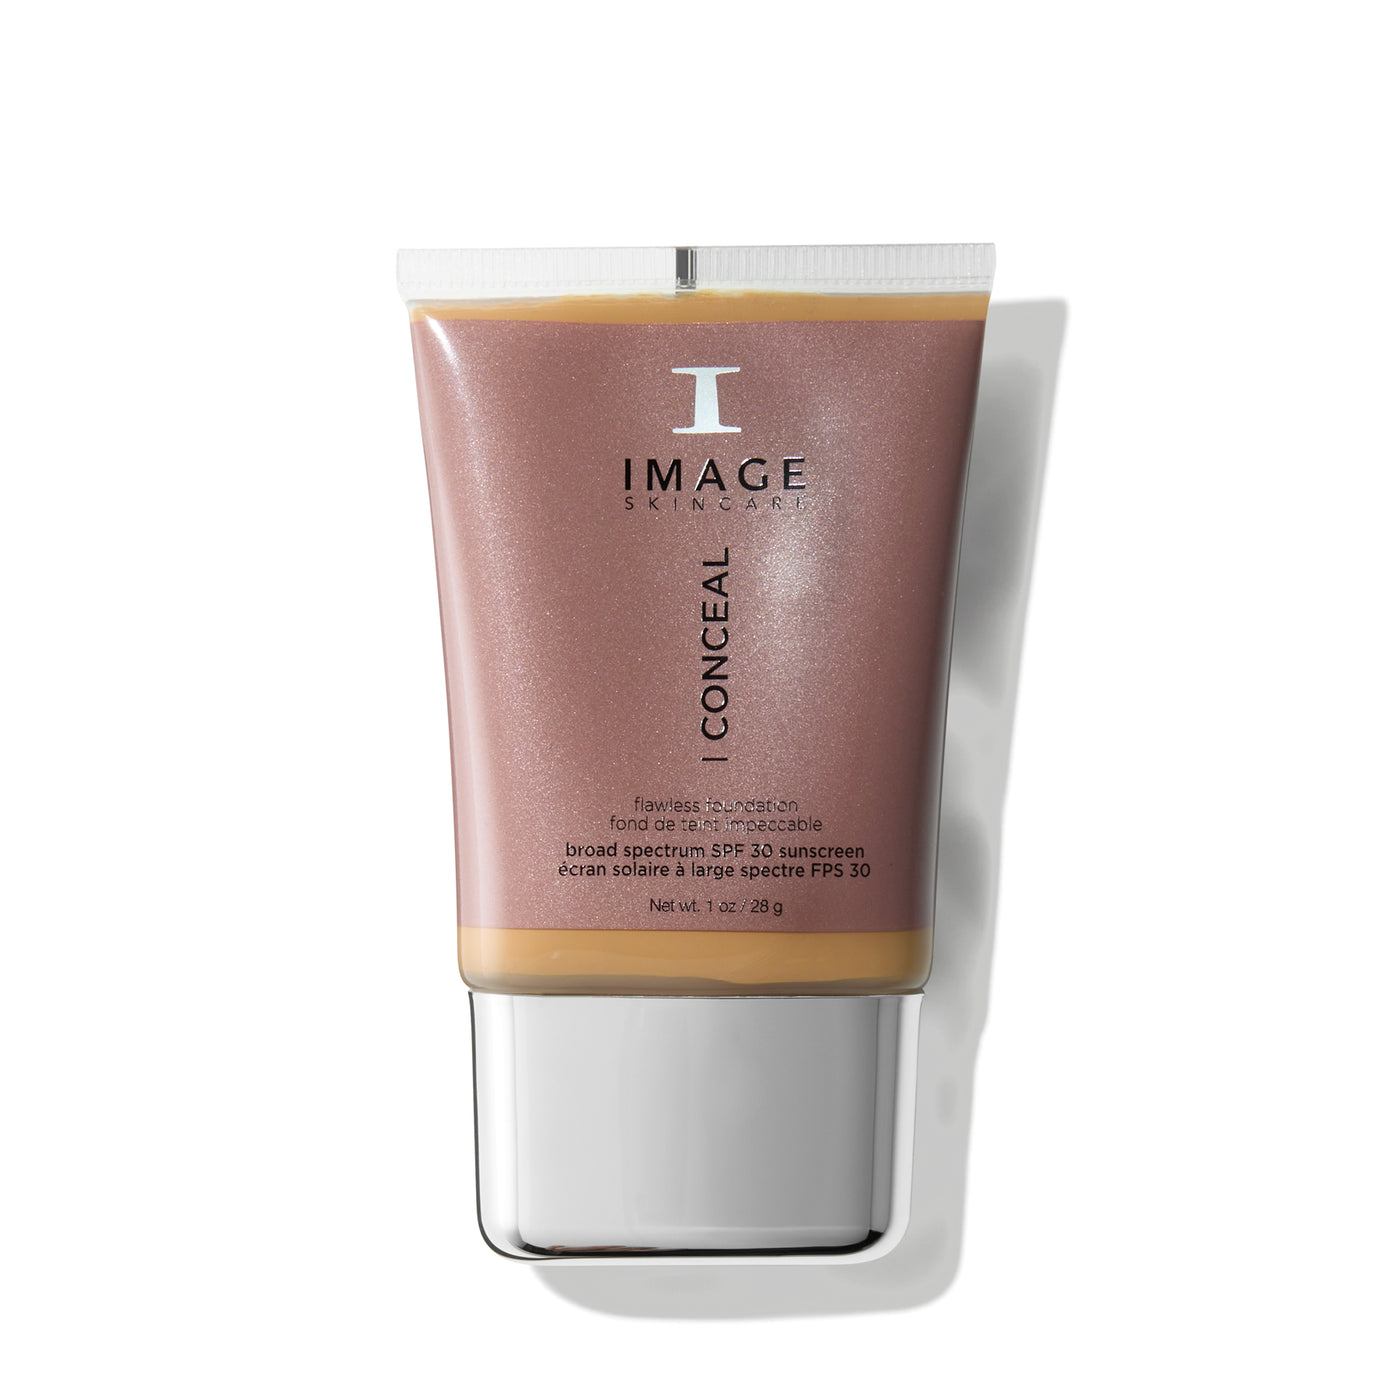 I CONCEAL flawless foundation broad - spectrum SPF 30 sunscreen toffee/caramel